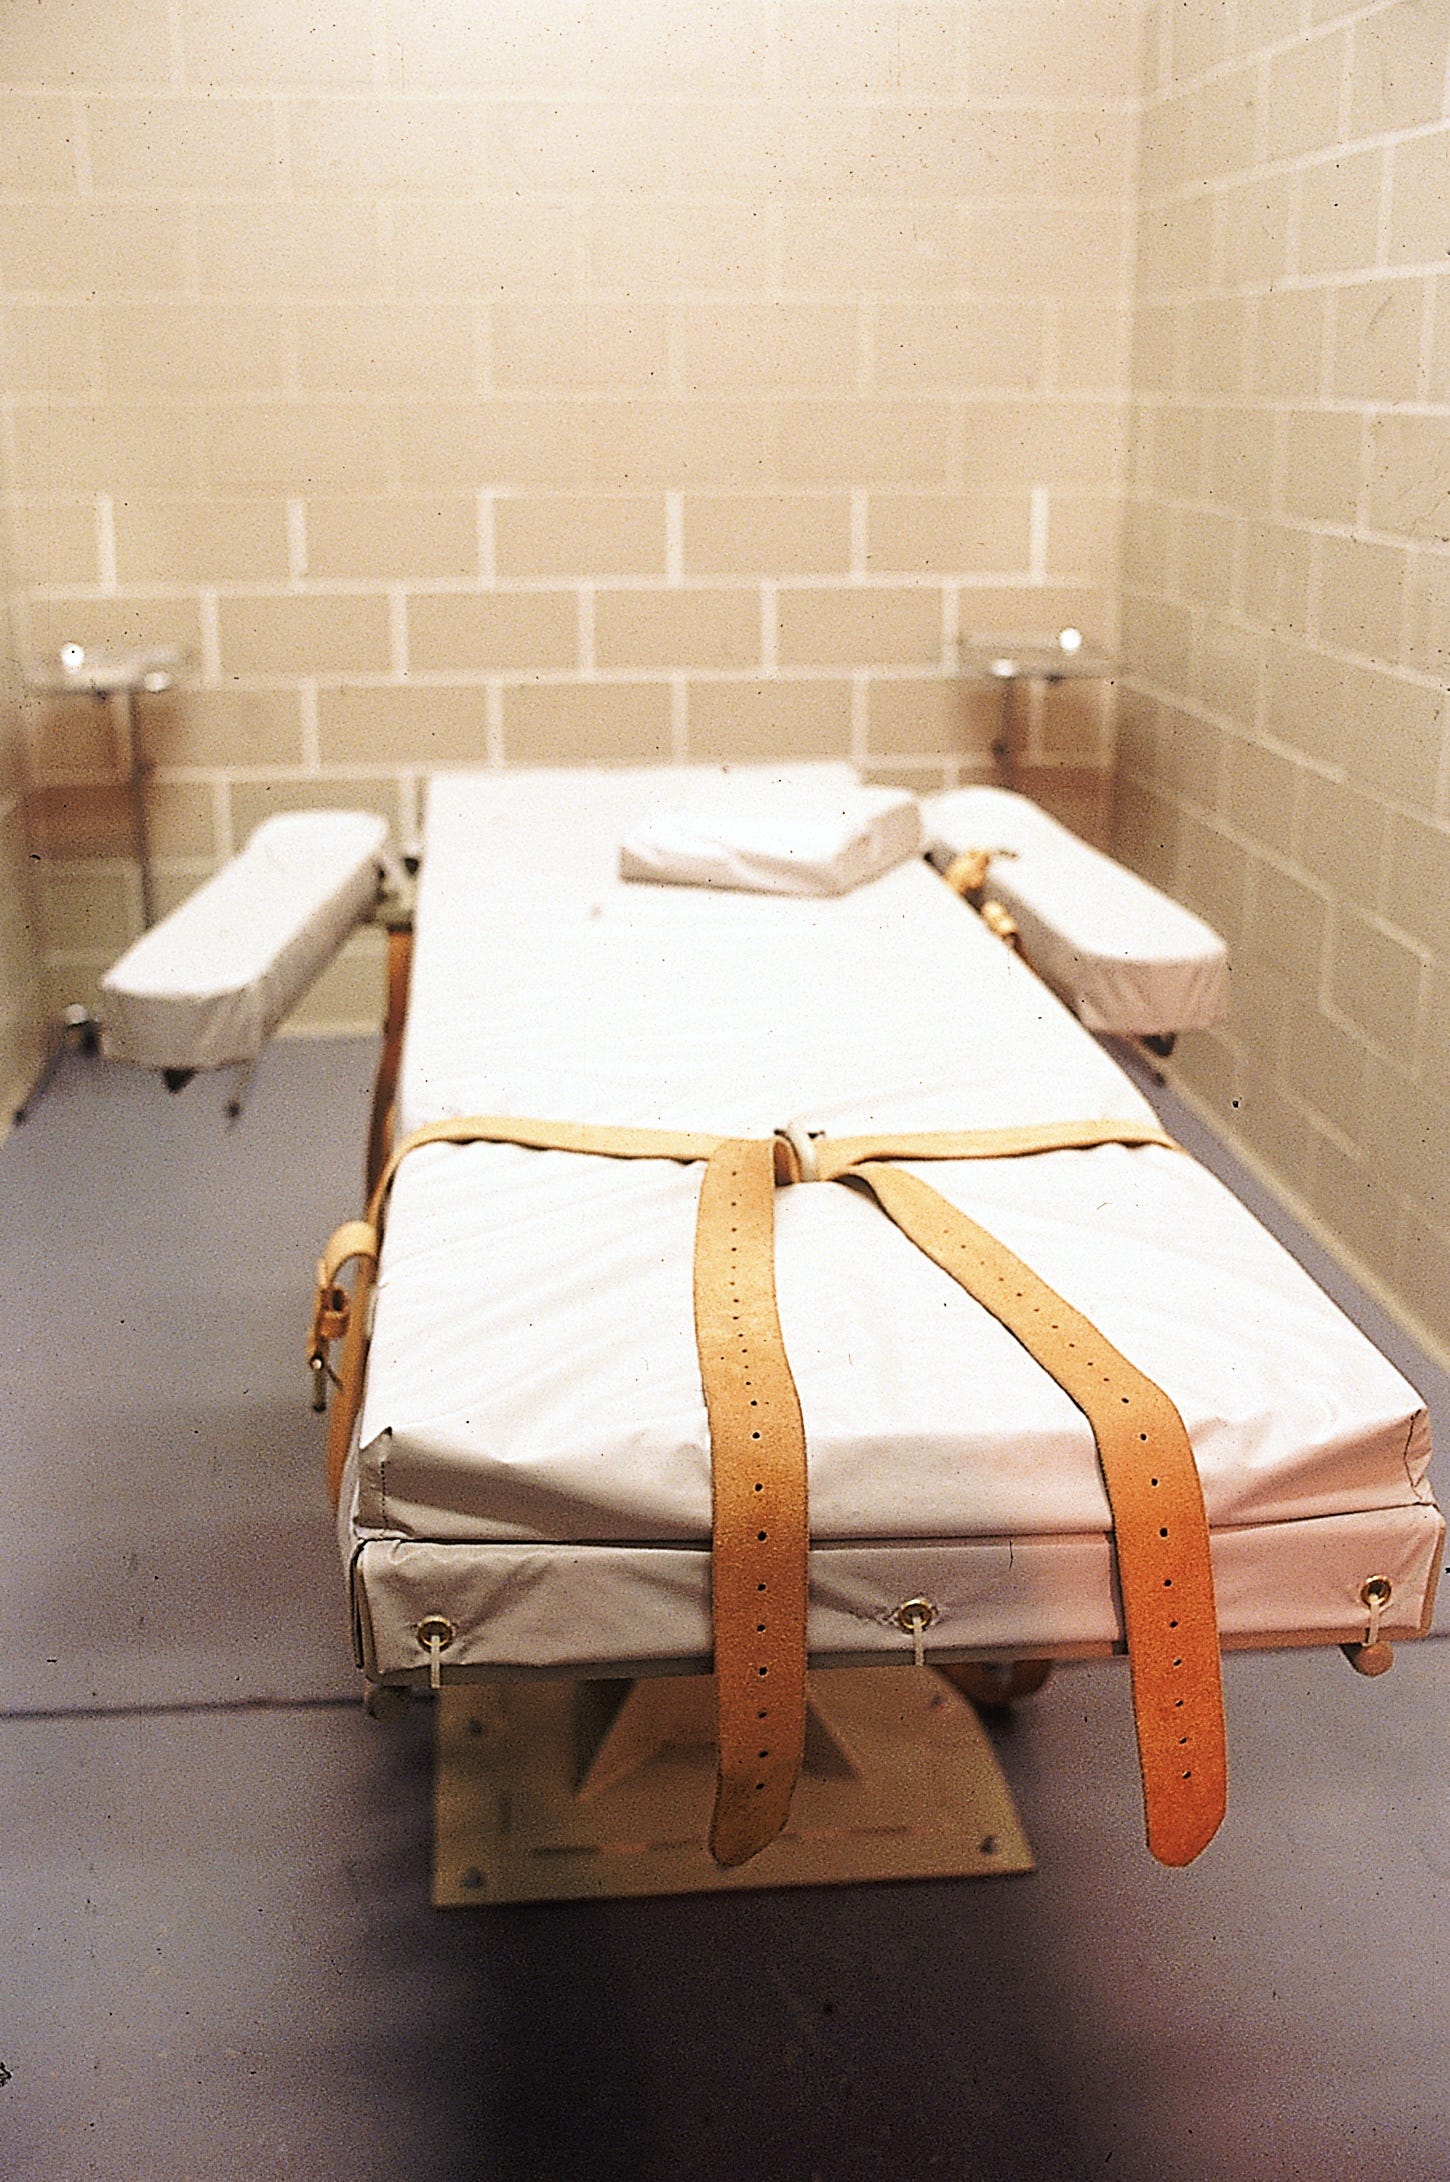 Arizona pauses death penalty pending review; system 'needs better oversight,' governor says